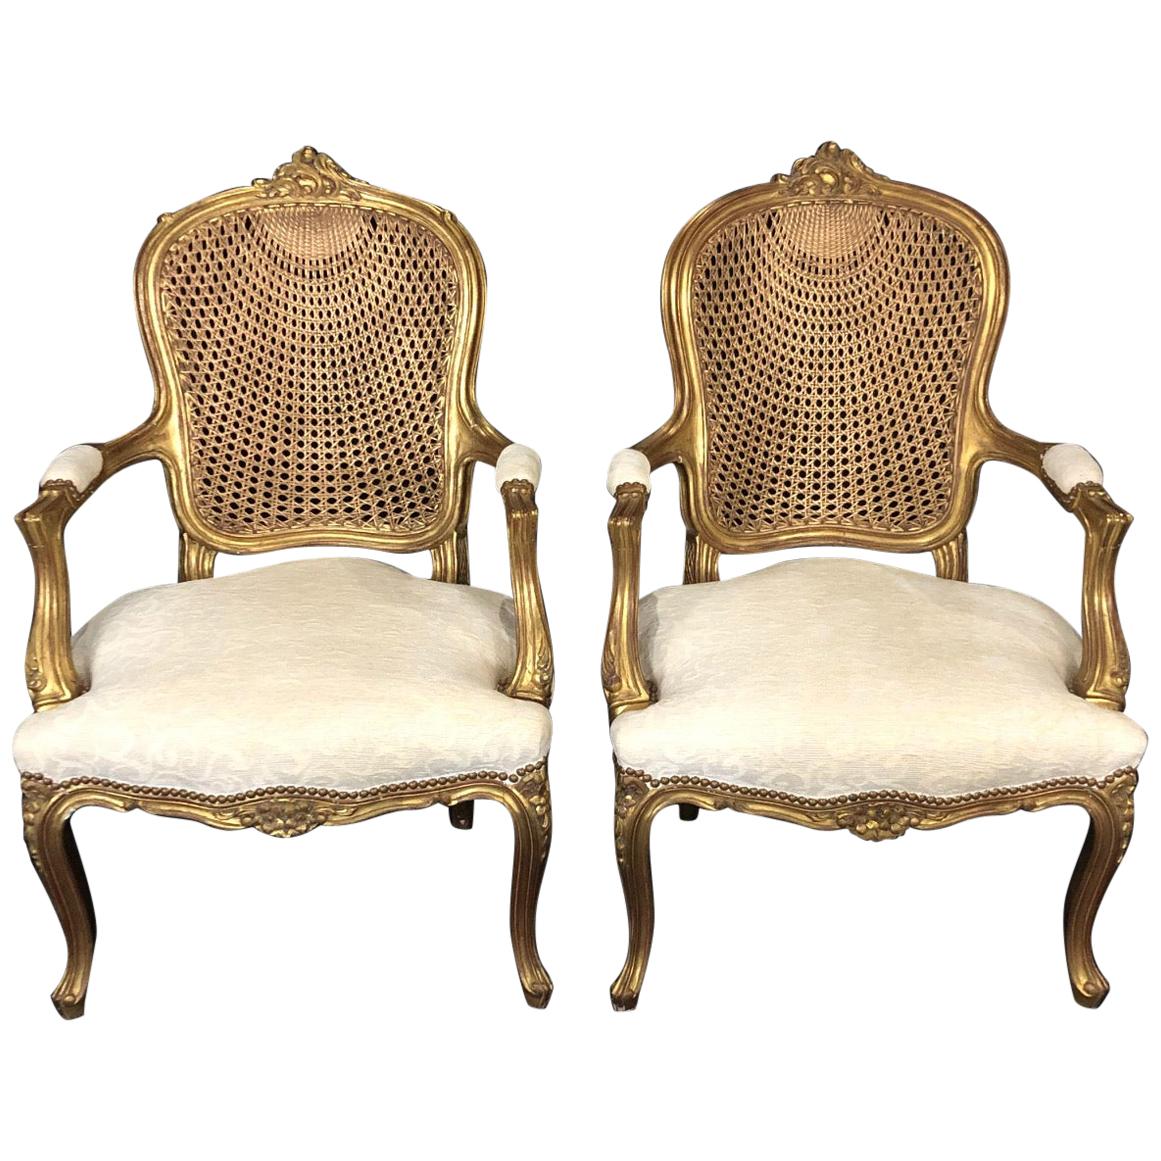 Glamorous Pair of French Louis XV Style Gold Gilt Caned Bergères Armchairs